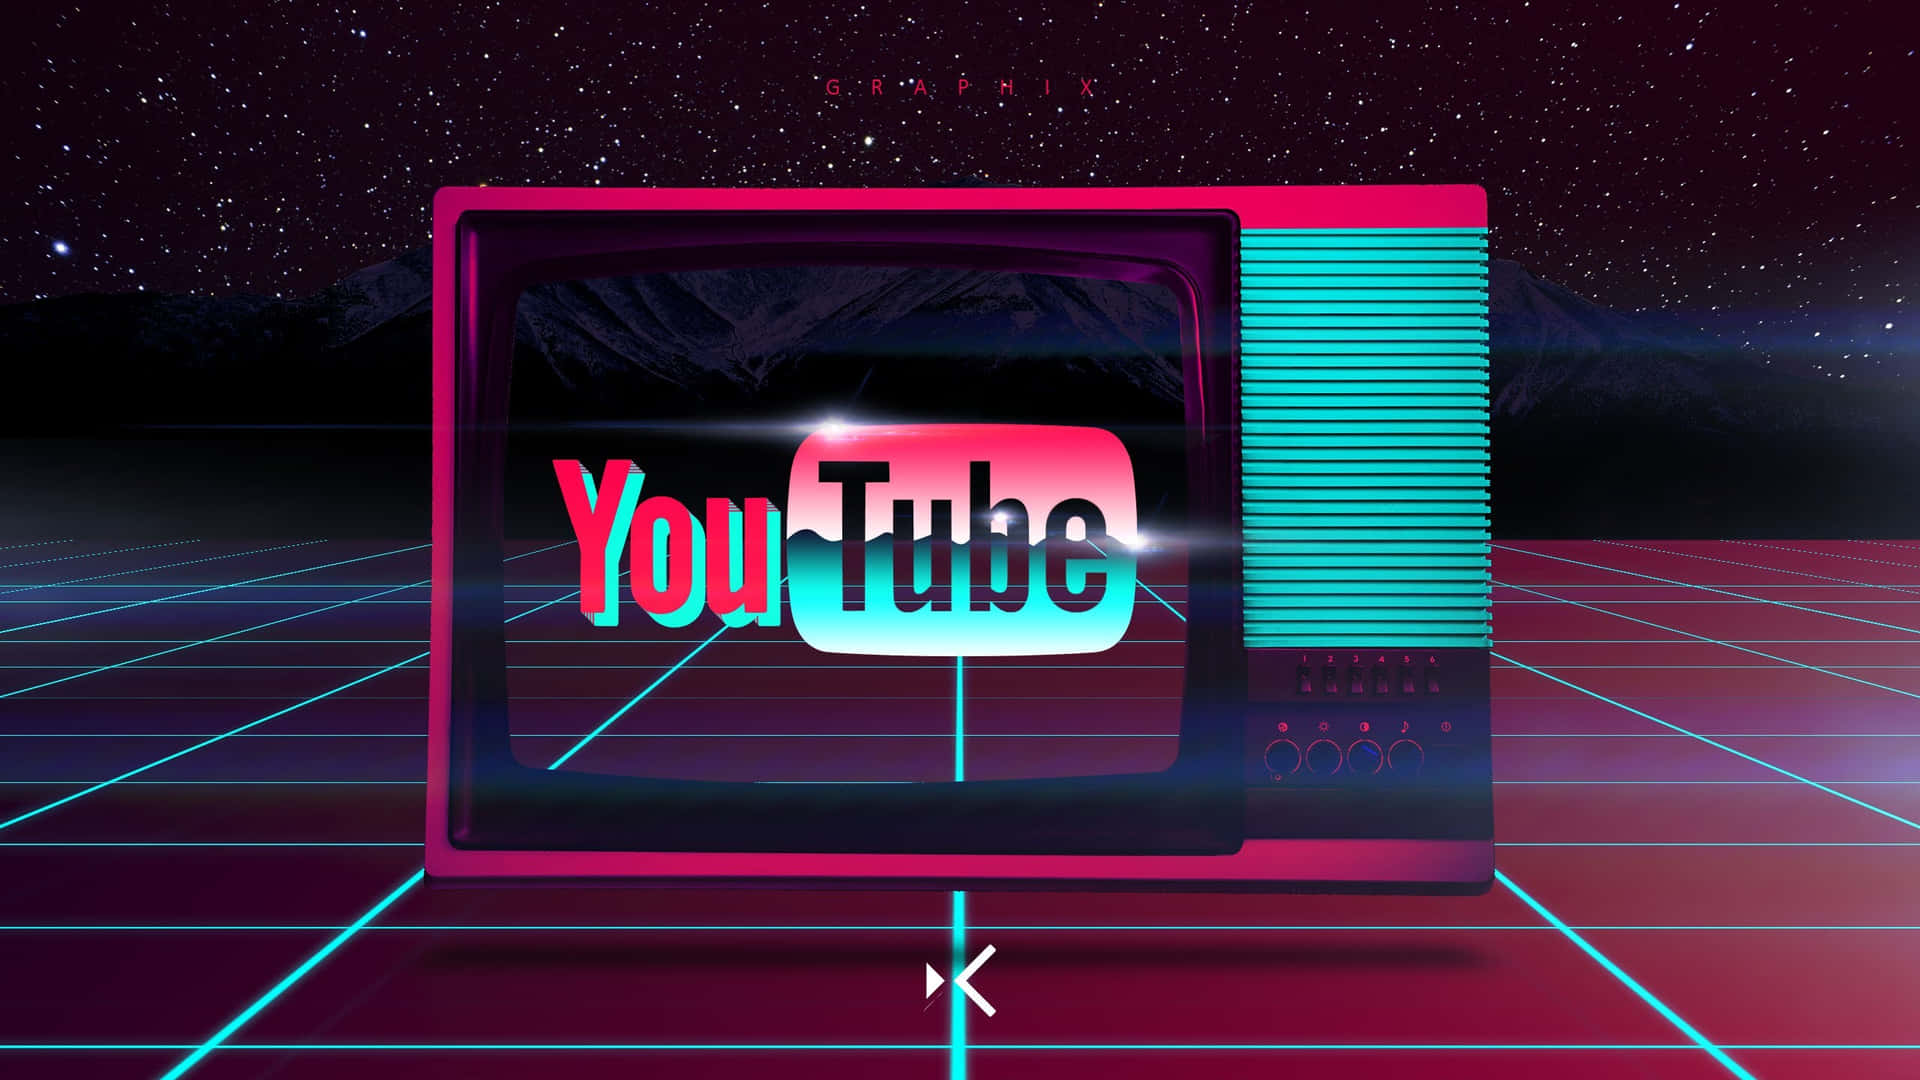 Stylish YouTube Logo on abstract red background